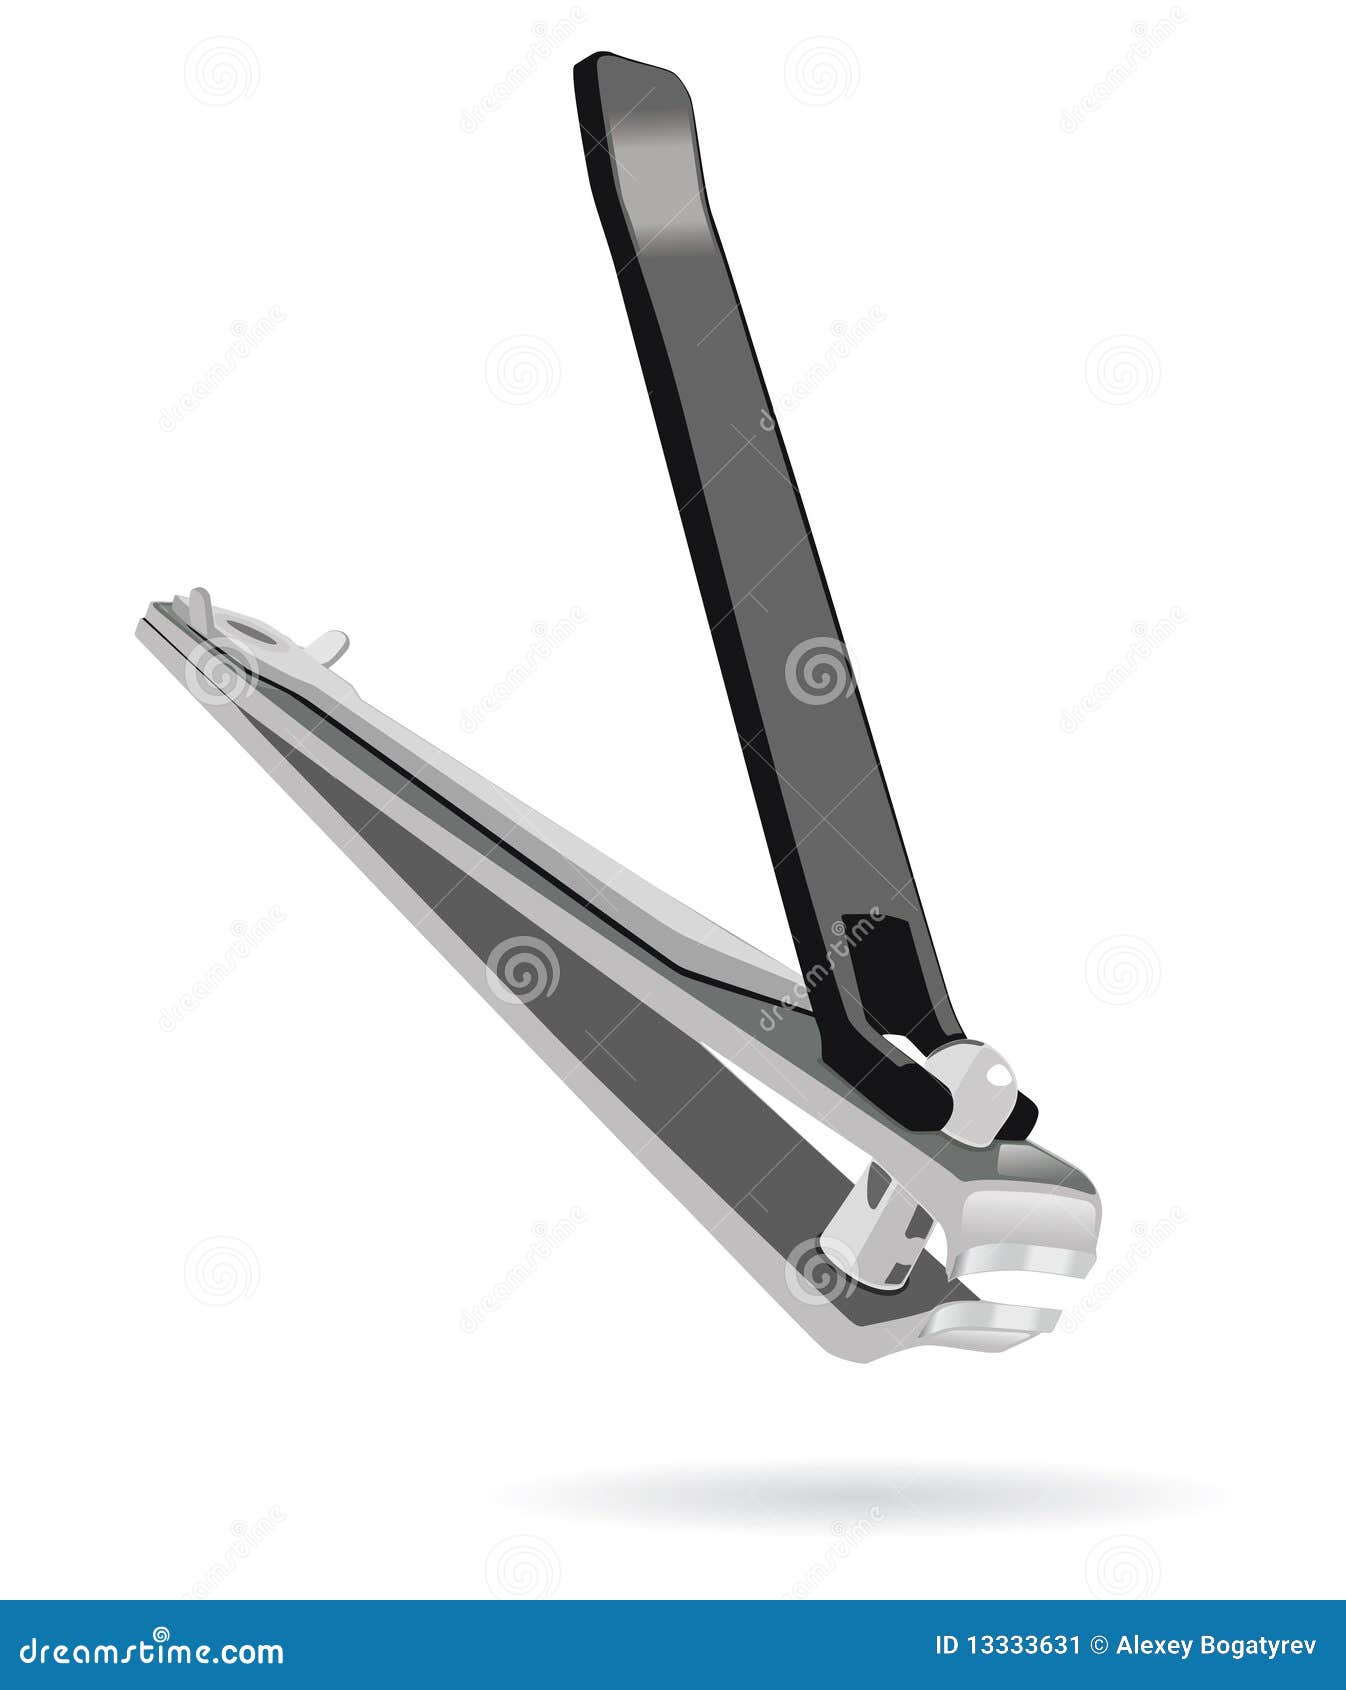 Nail Clippers | Free Stock Photo | Illustration of nail clippers - Clip Art  Library